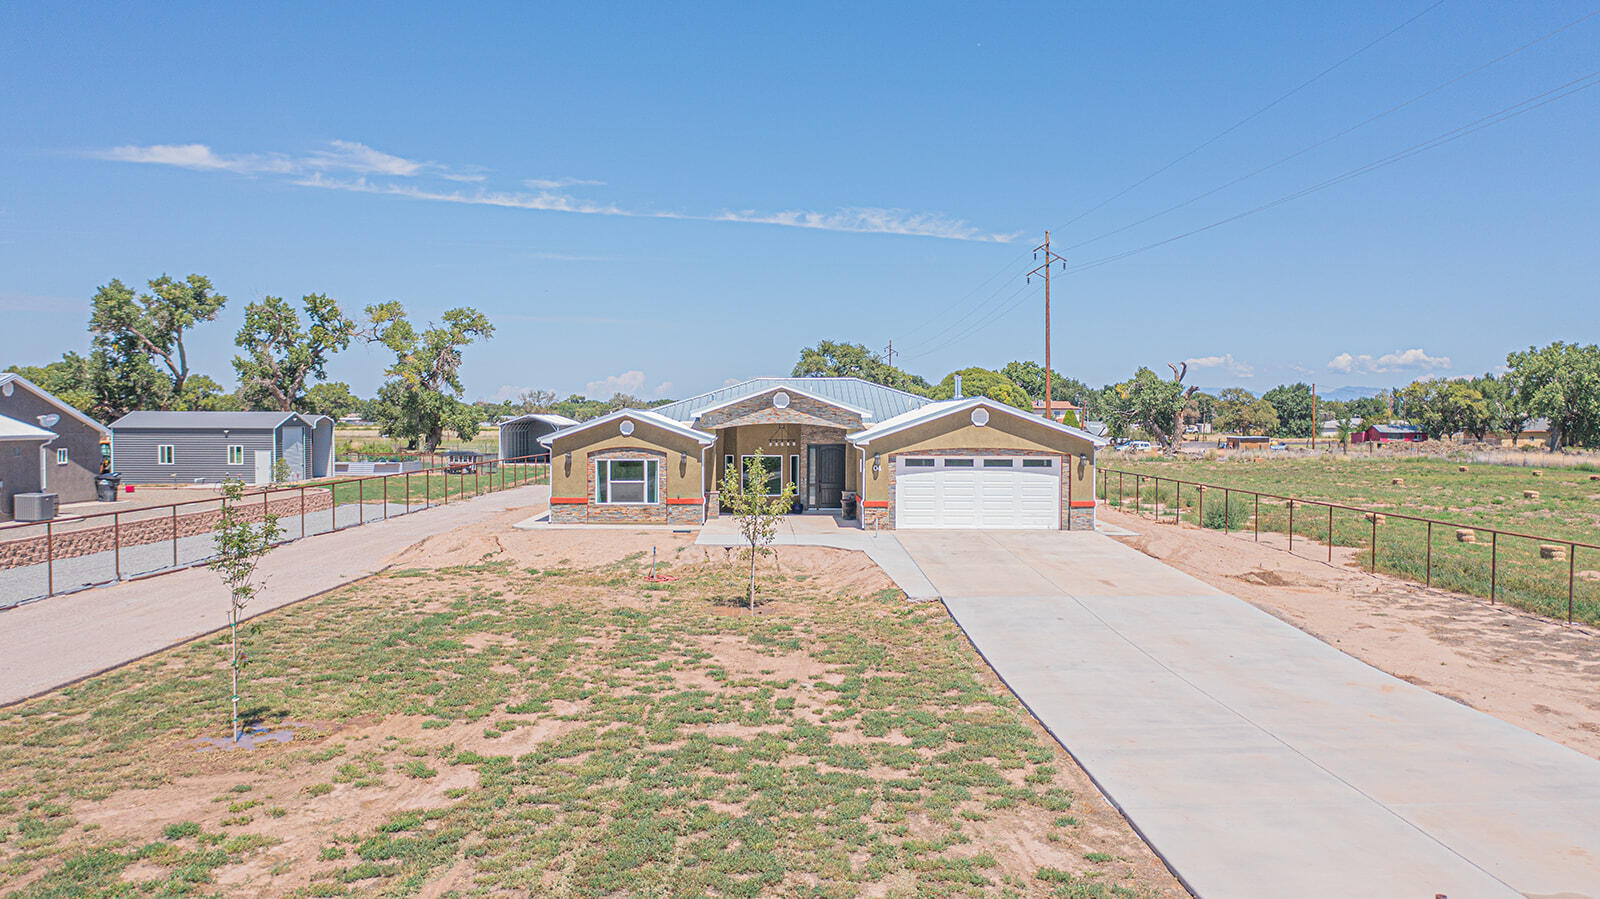 This gorgeous home is conveniently located right off of Interstate 25 in Belen, NM.  This quaint town is the best kept secret in New Mexico and this home is a beautiful representation of that.